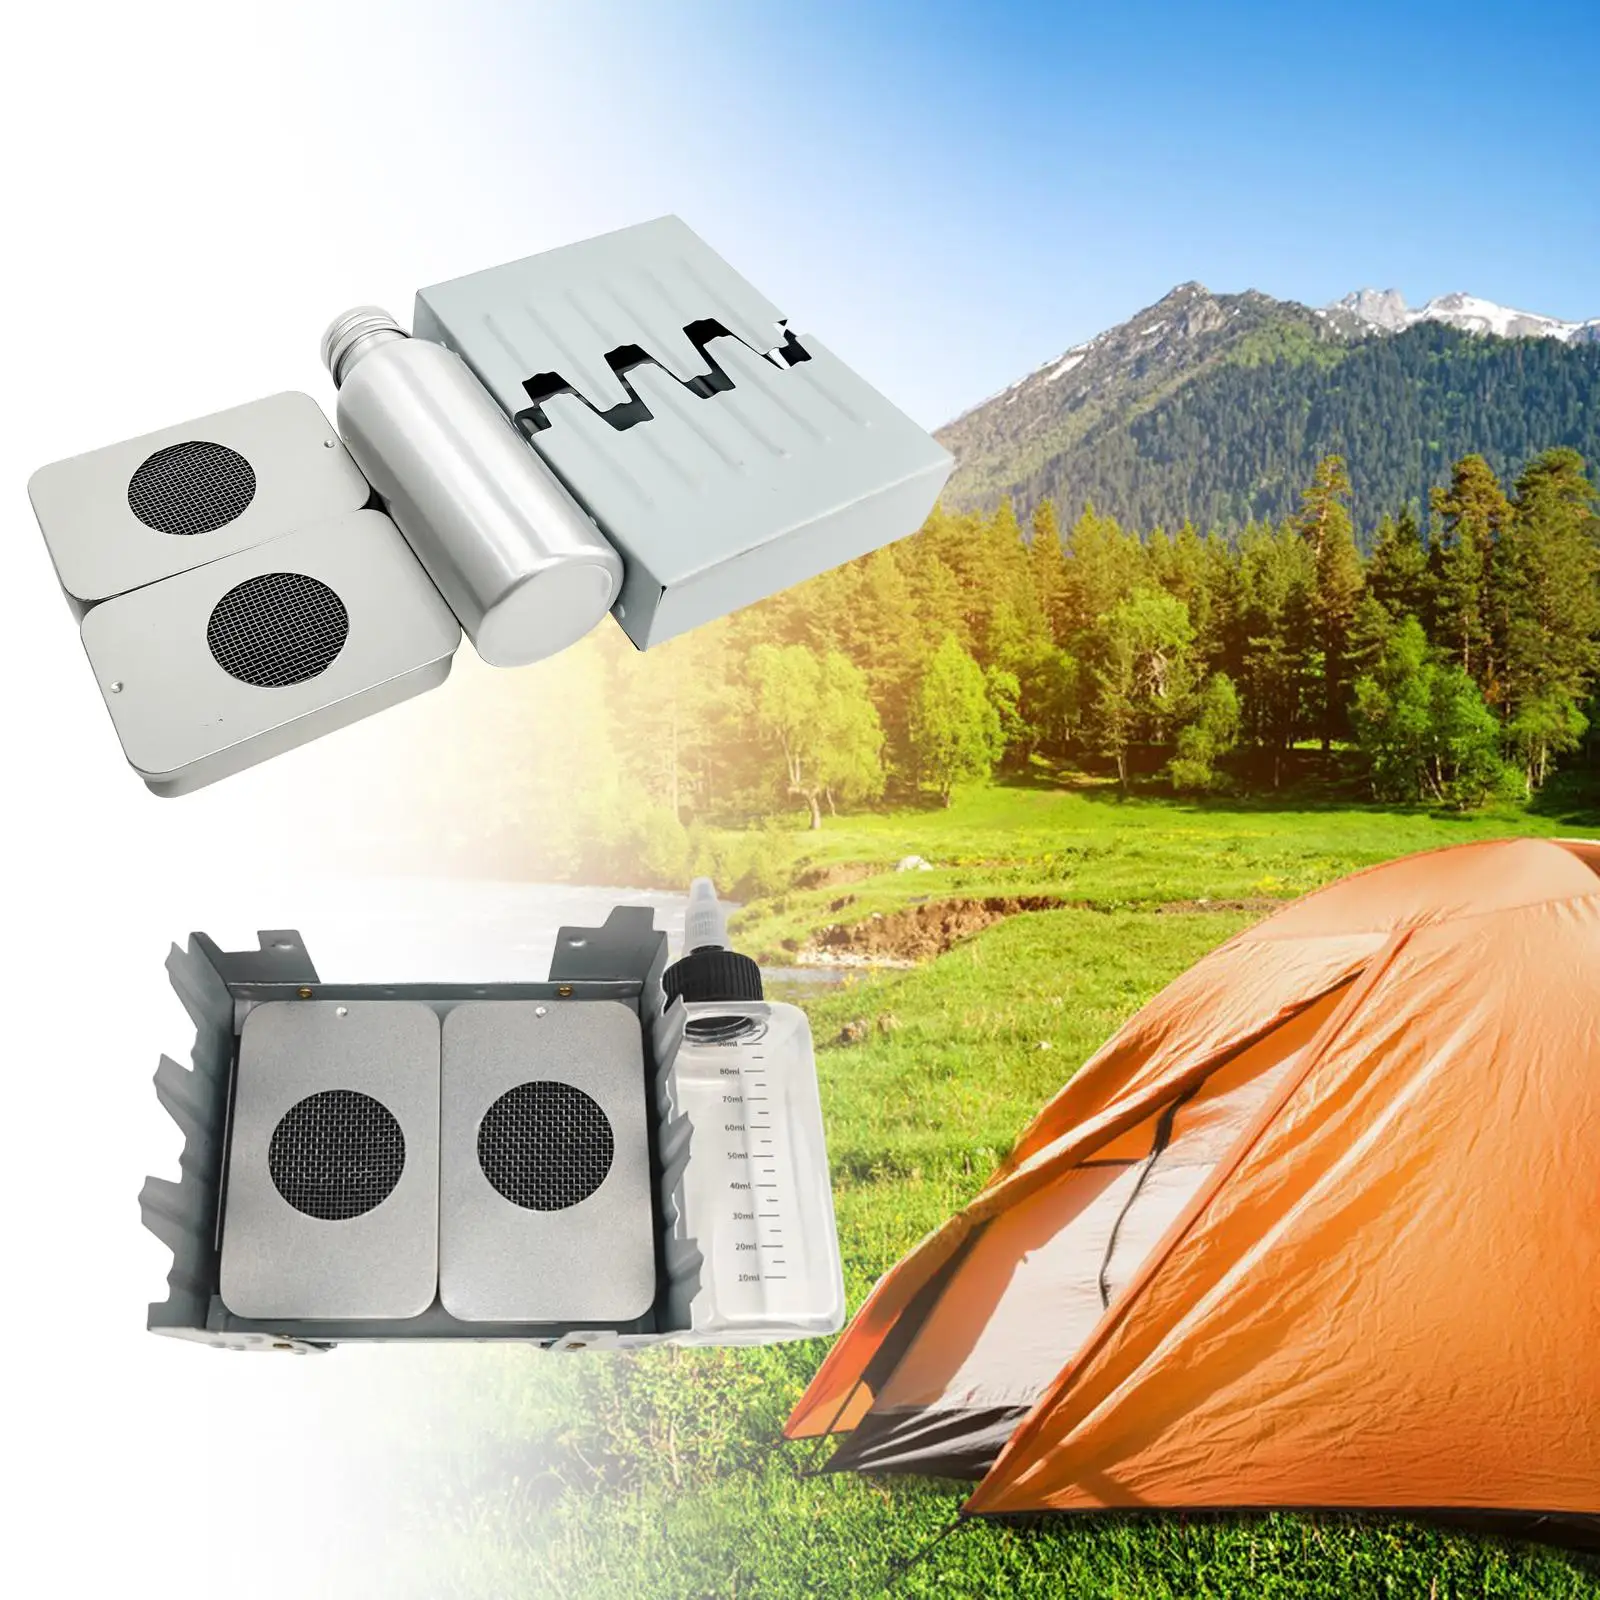 Mini  Camping Stoves Set DIY Accessories Lightweight Storage Pocket  Heater for Hiking Outdoor Barbecue Picnic Mountaineering